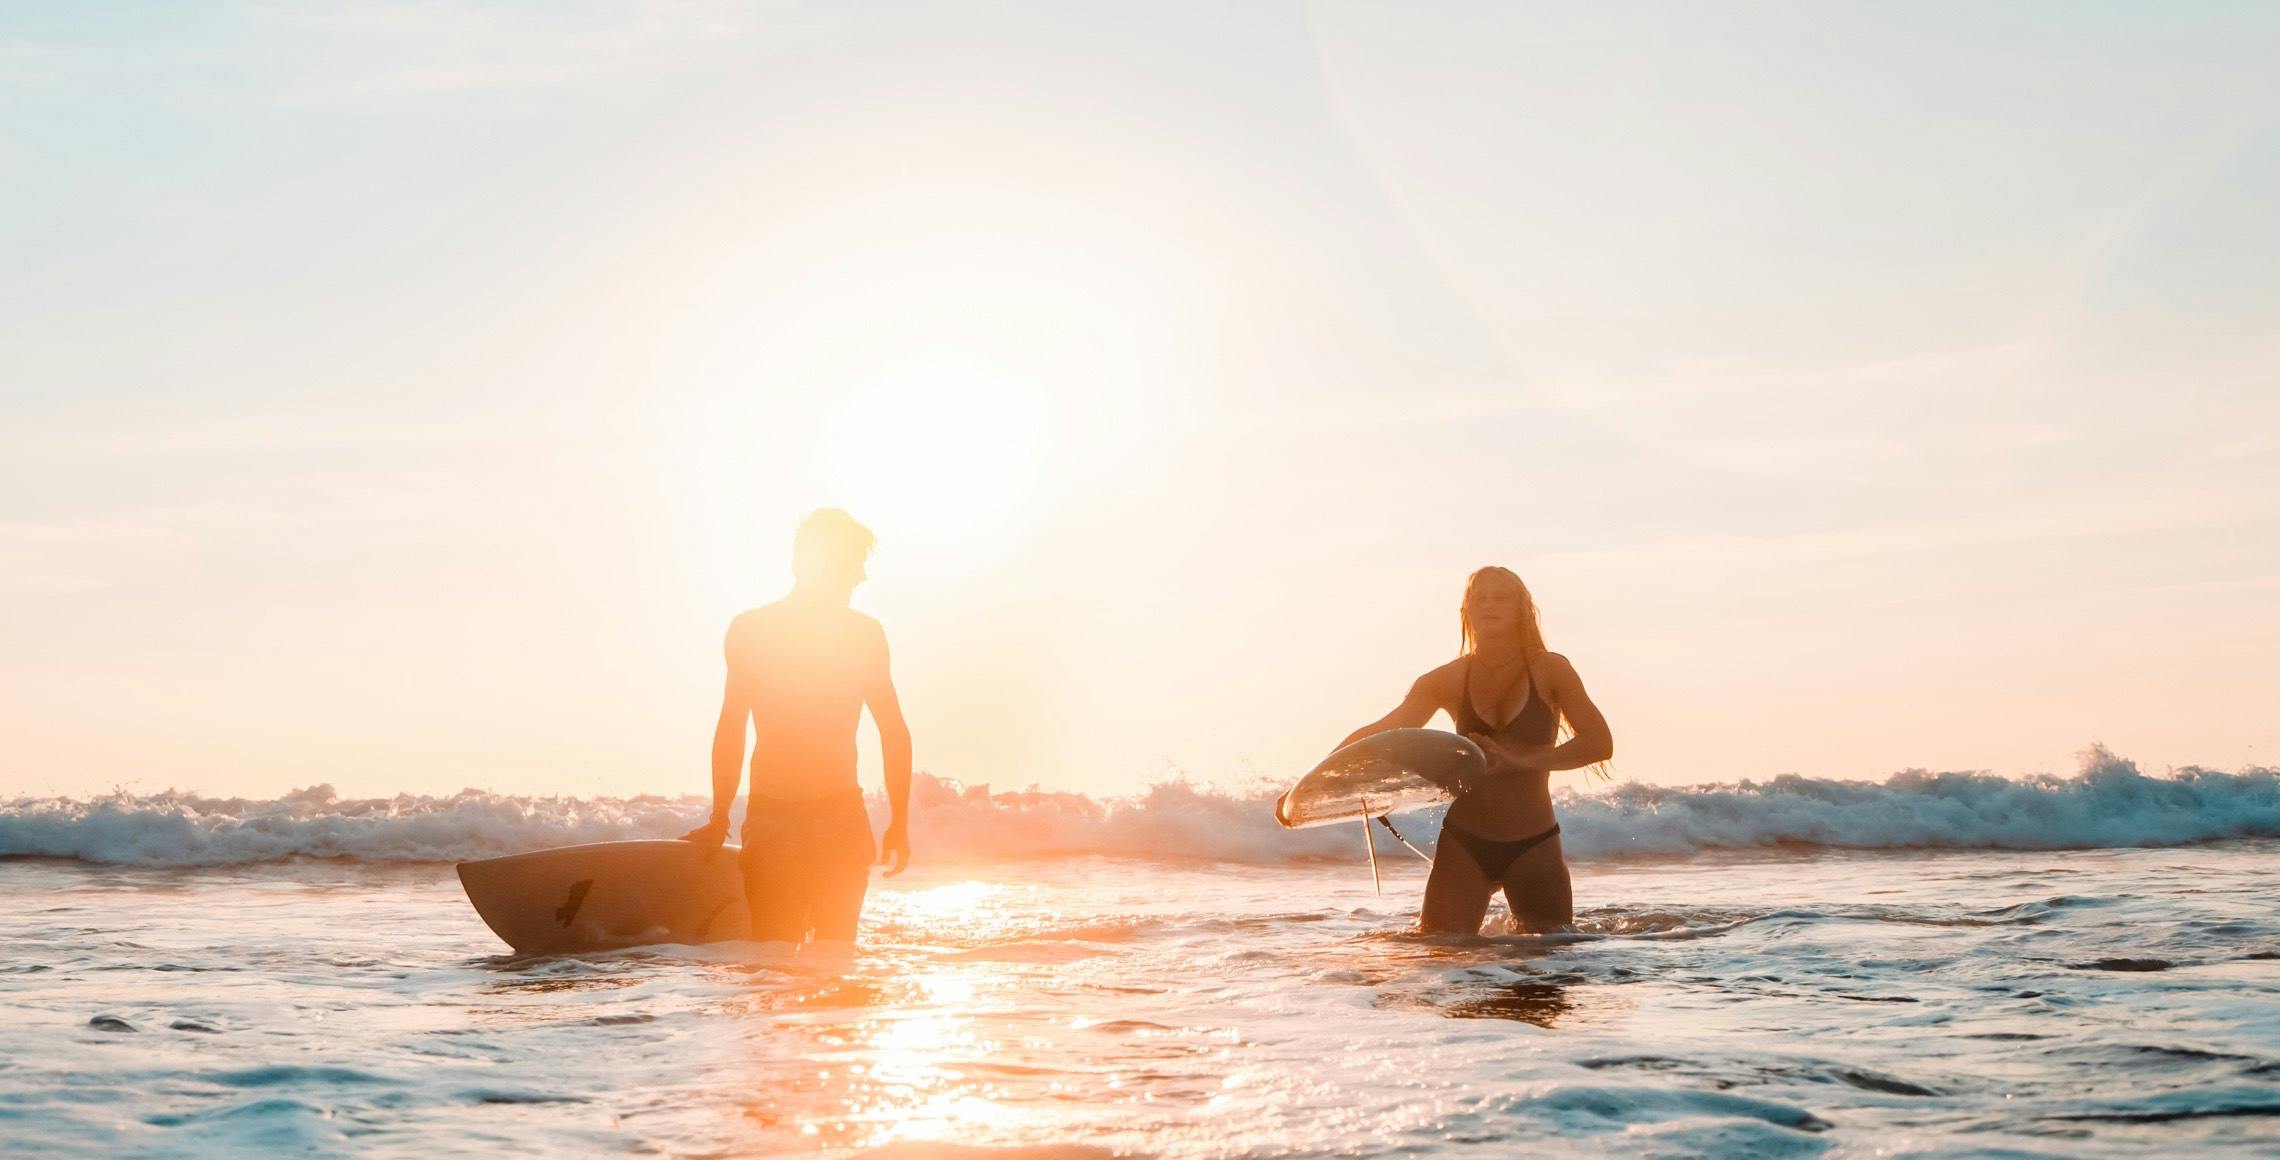 A man and woman surfing at sunset.